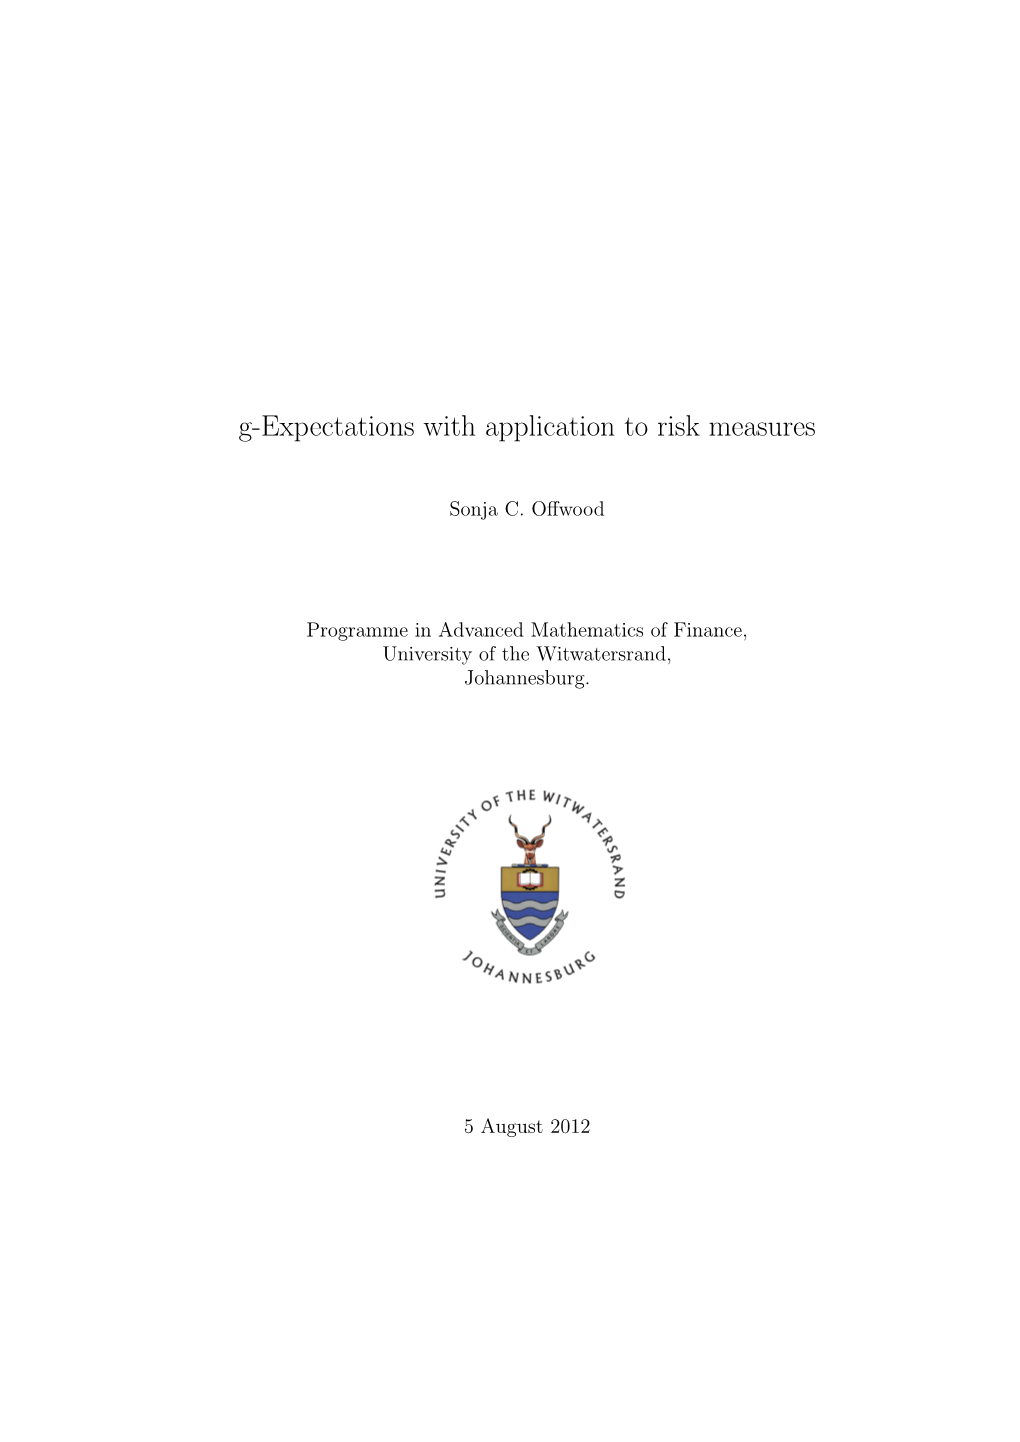 G-Expectations with Application to Risk Measures